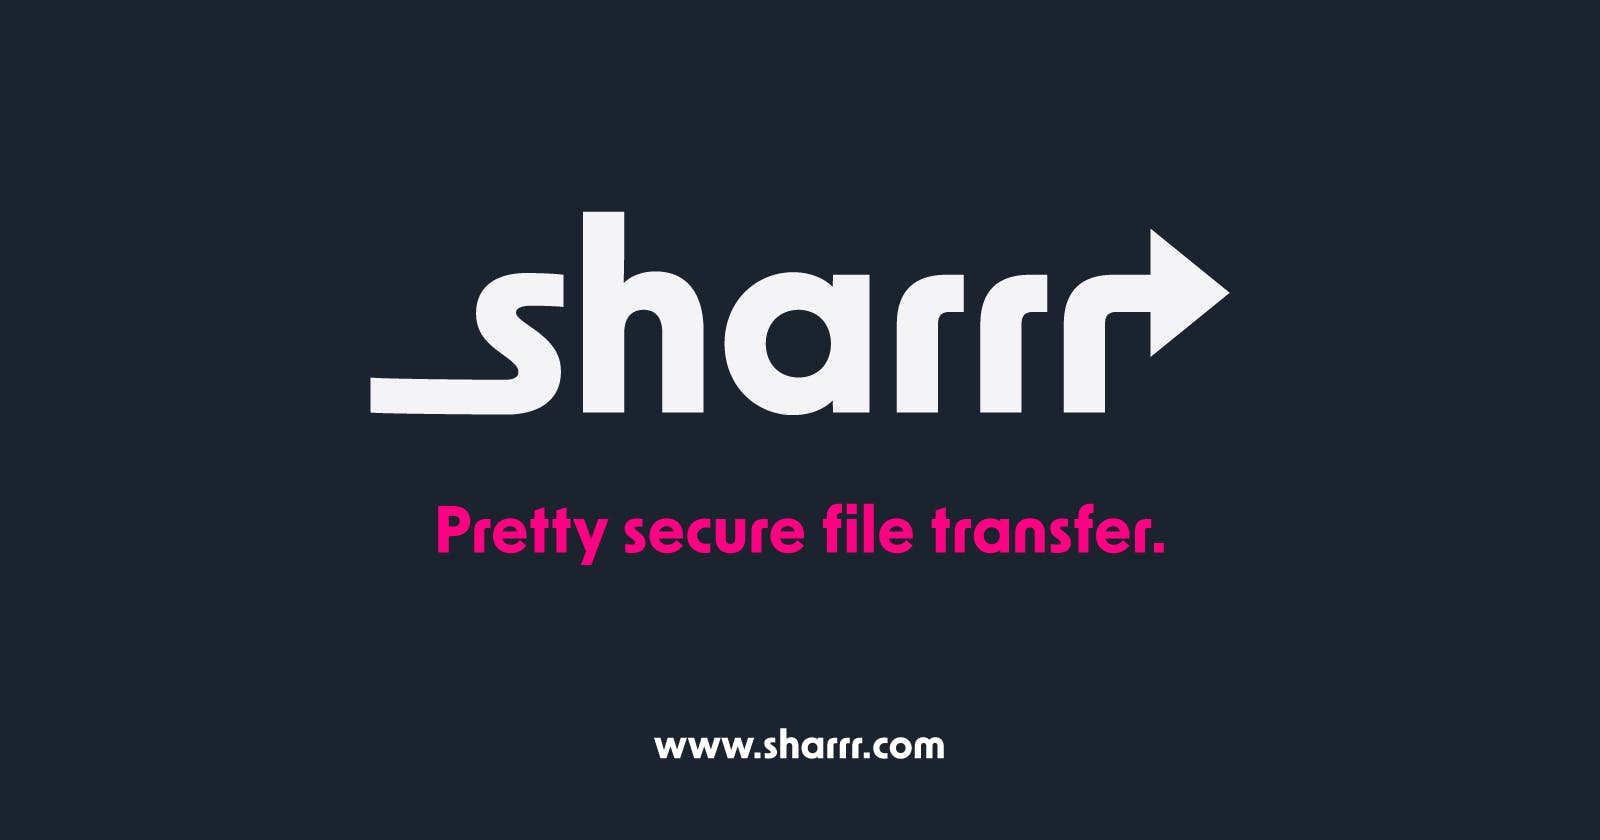 How to securely share a file?